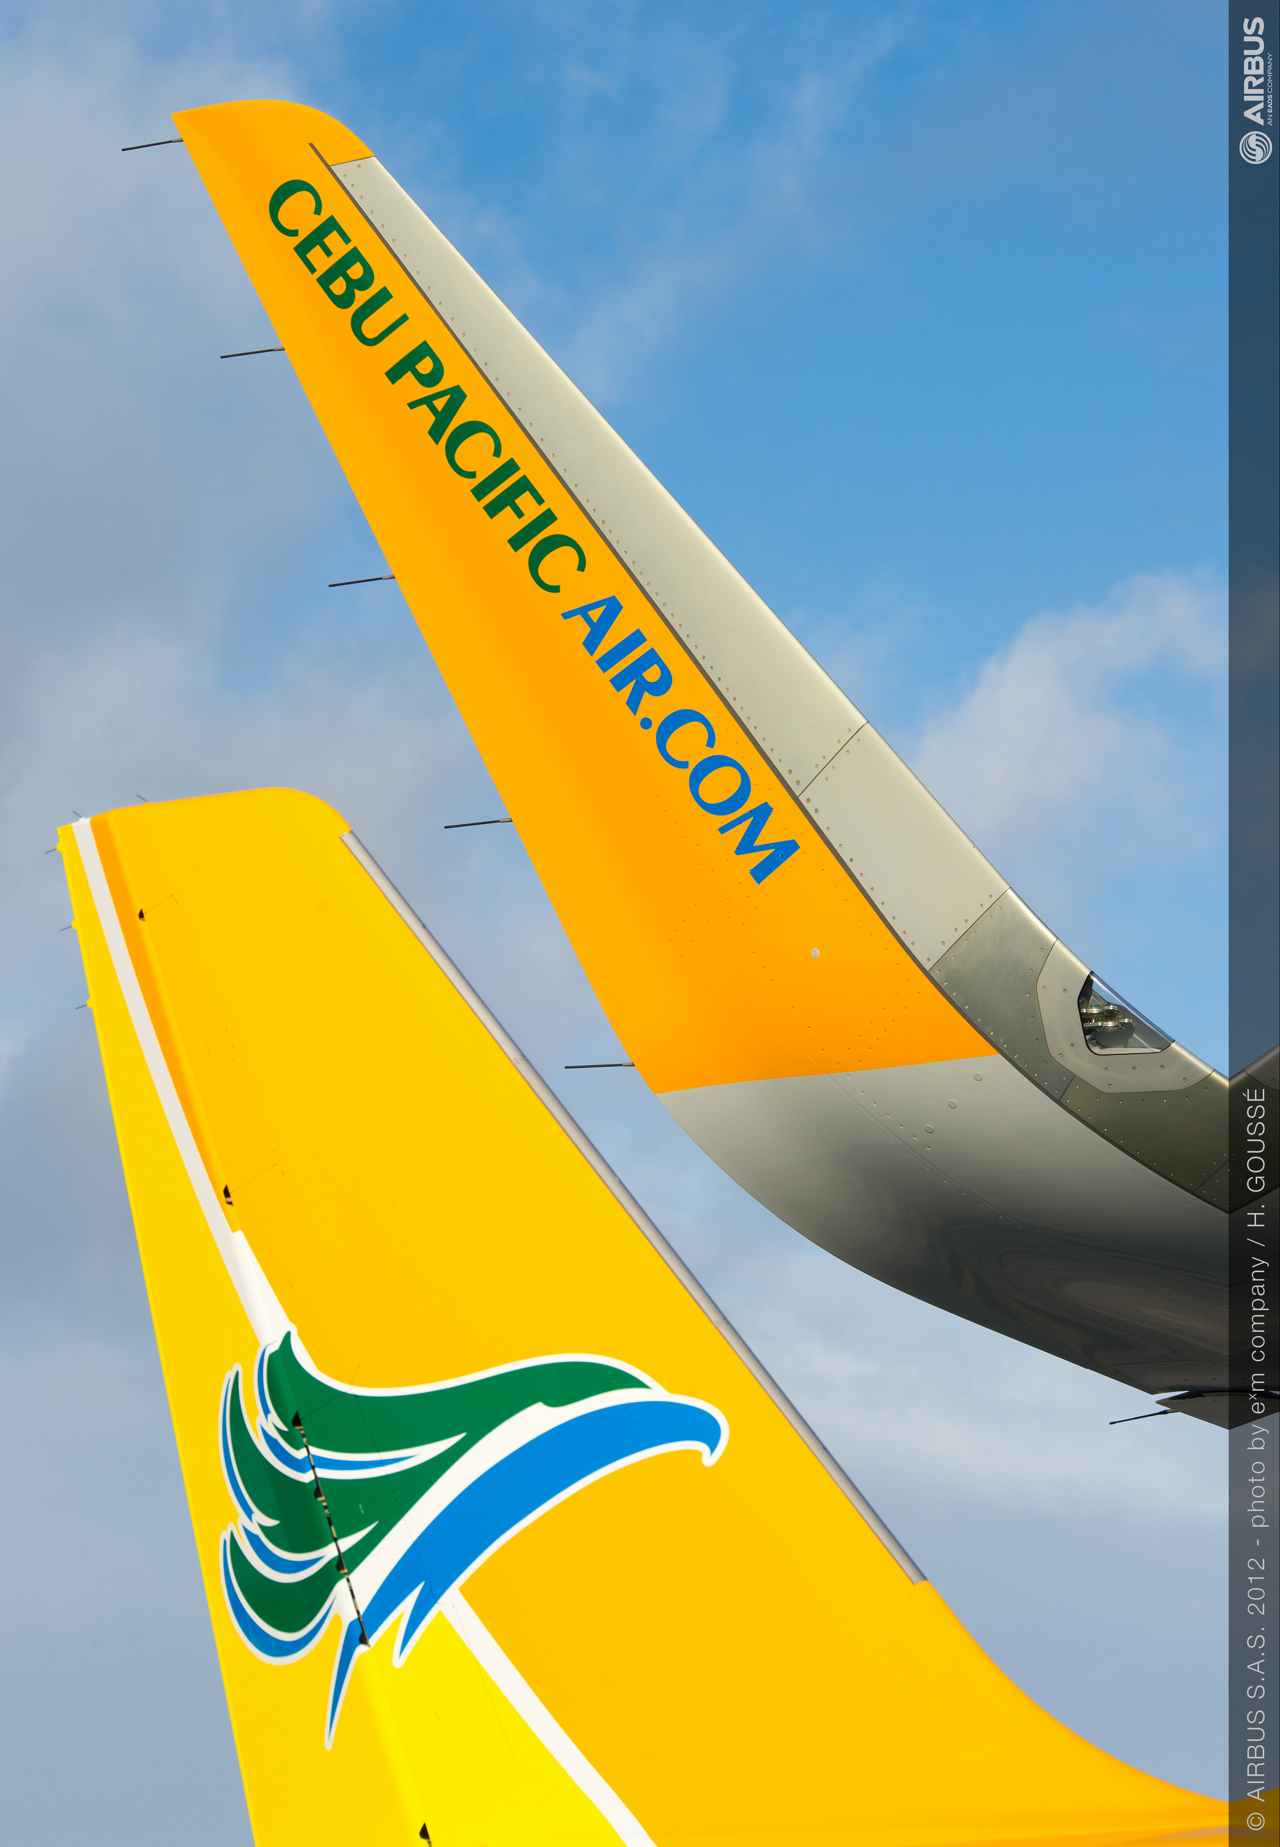 cebu pacific air takes delivery of its first a320 with sharklets commercial aircraft airbus cebu pacific air takes delivery of its